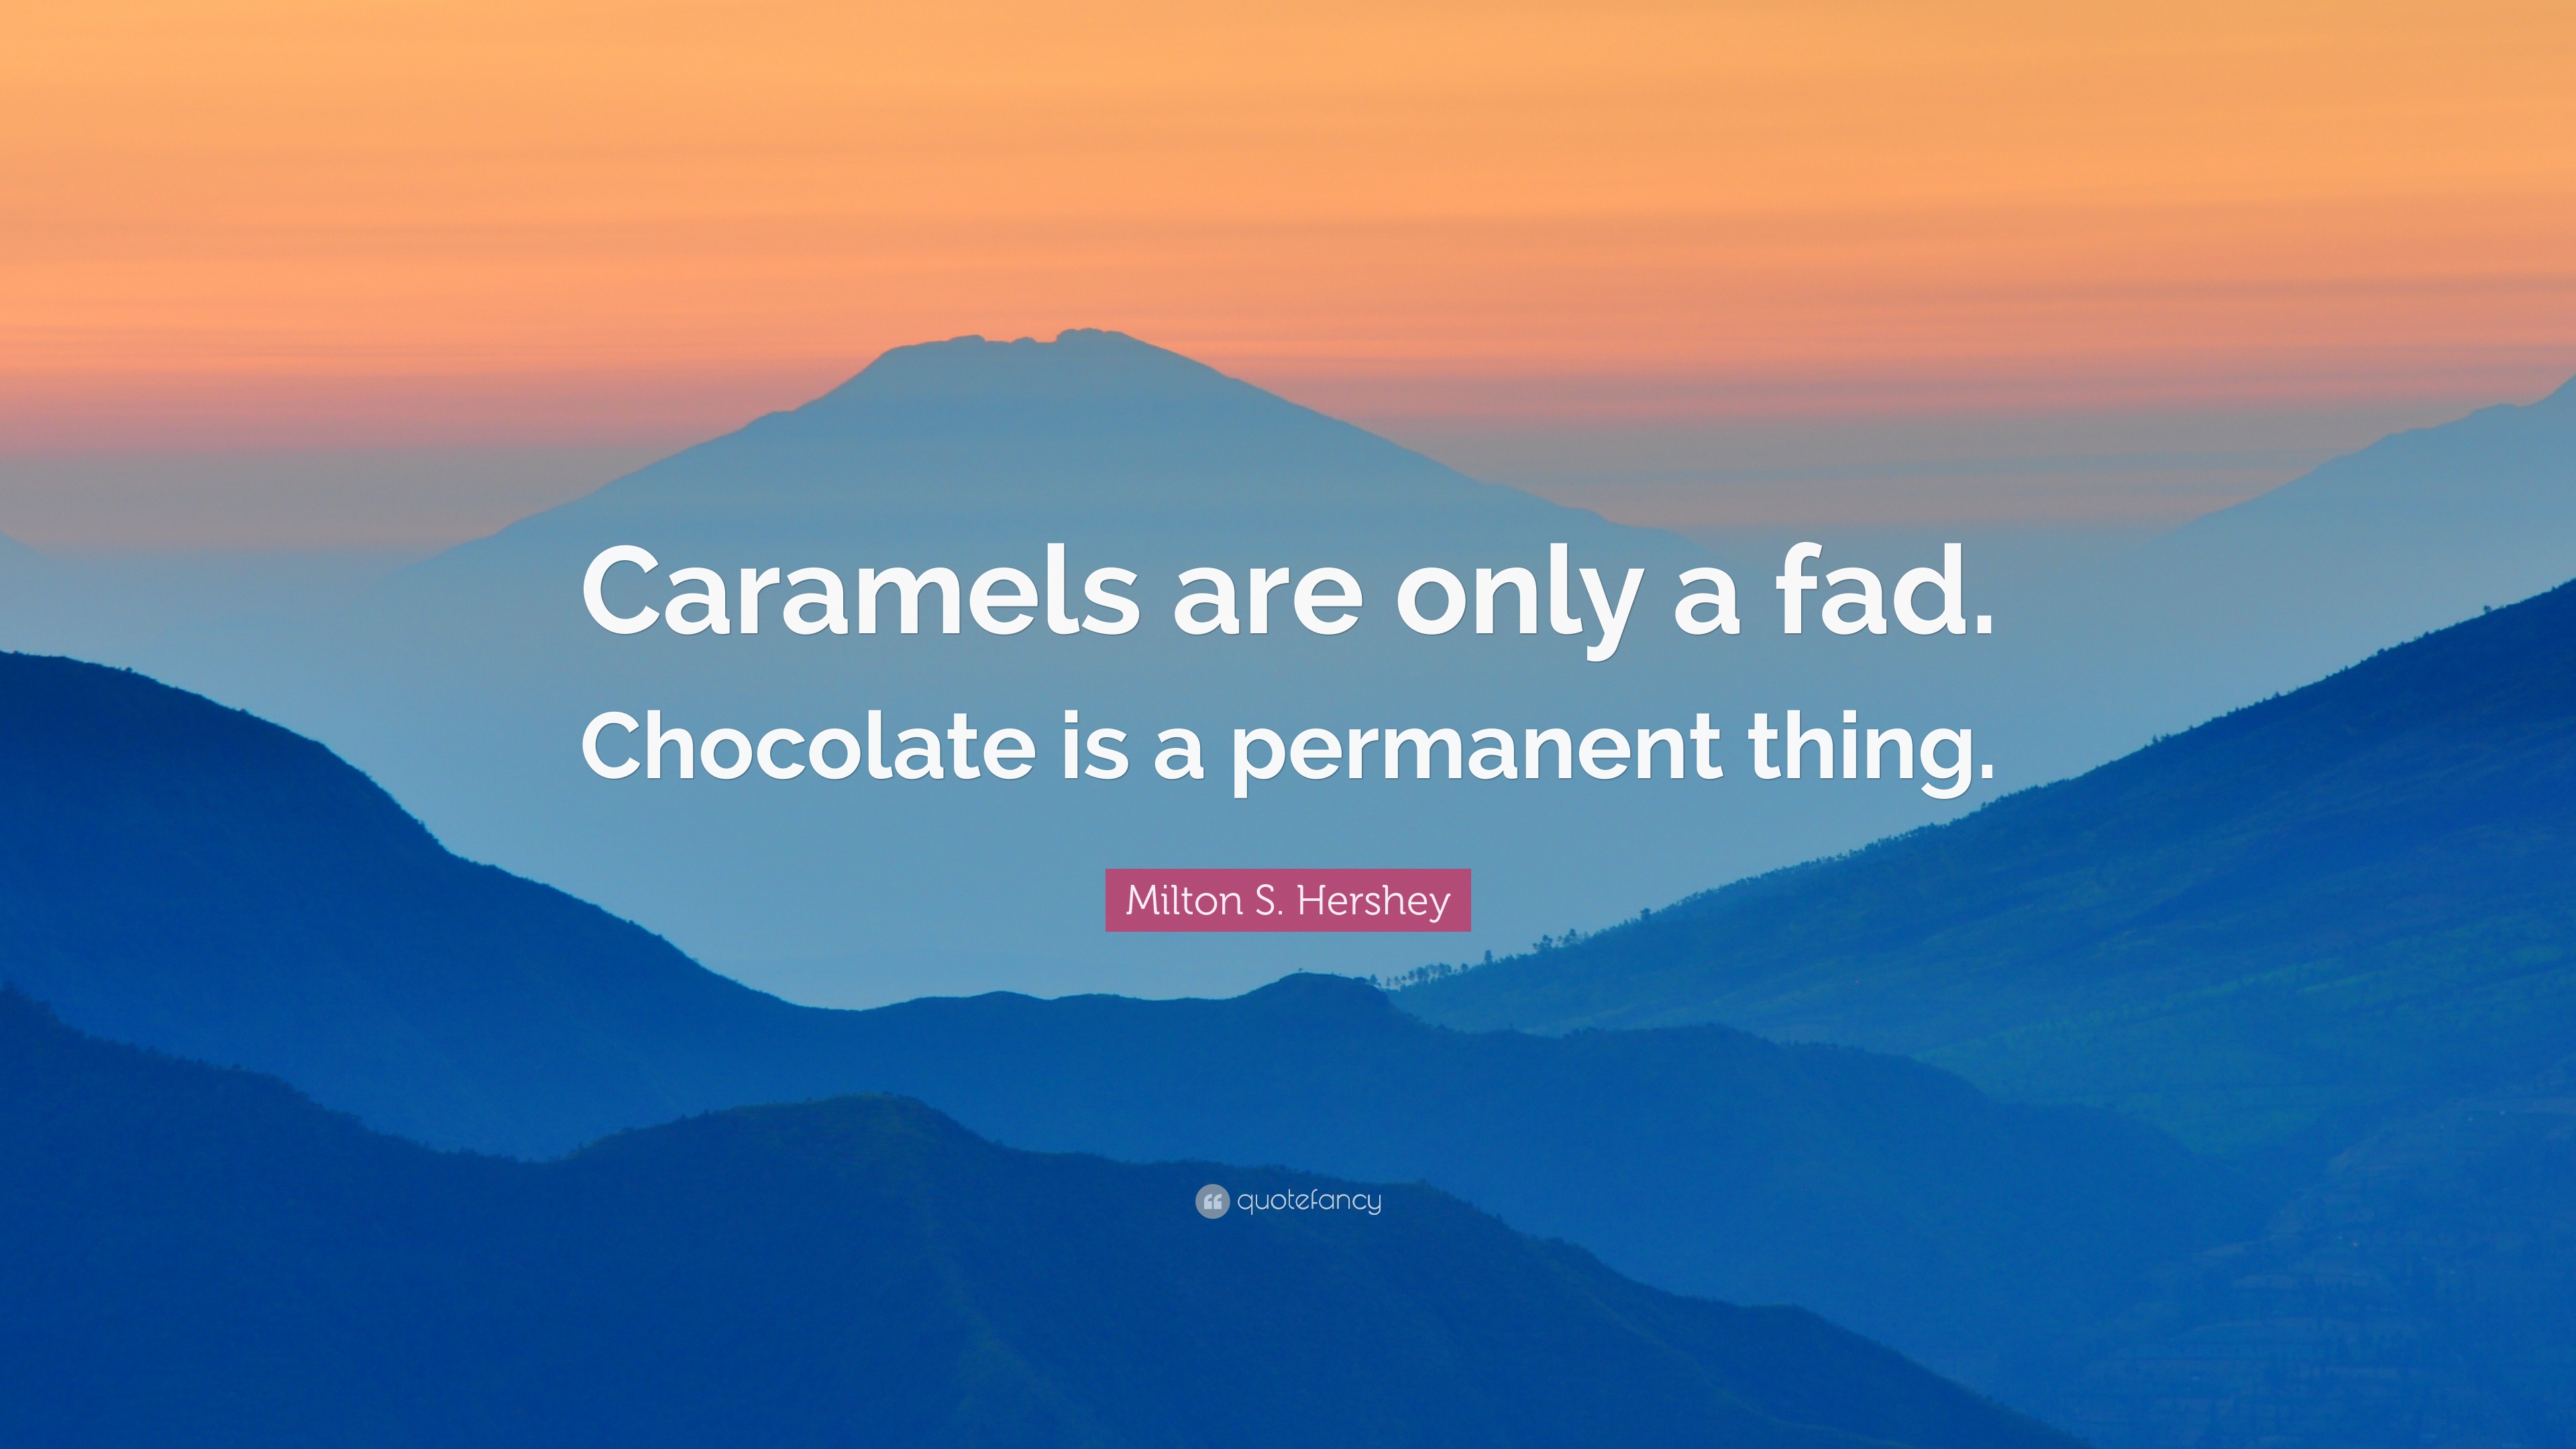 Milton S. Hershey Quote: “Caramels are only a fad. Chocolate is a